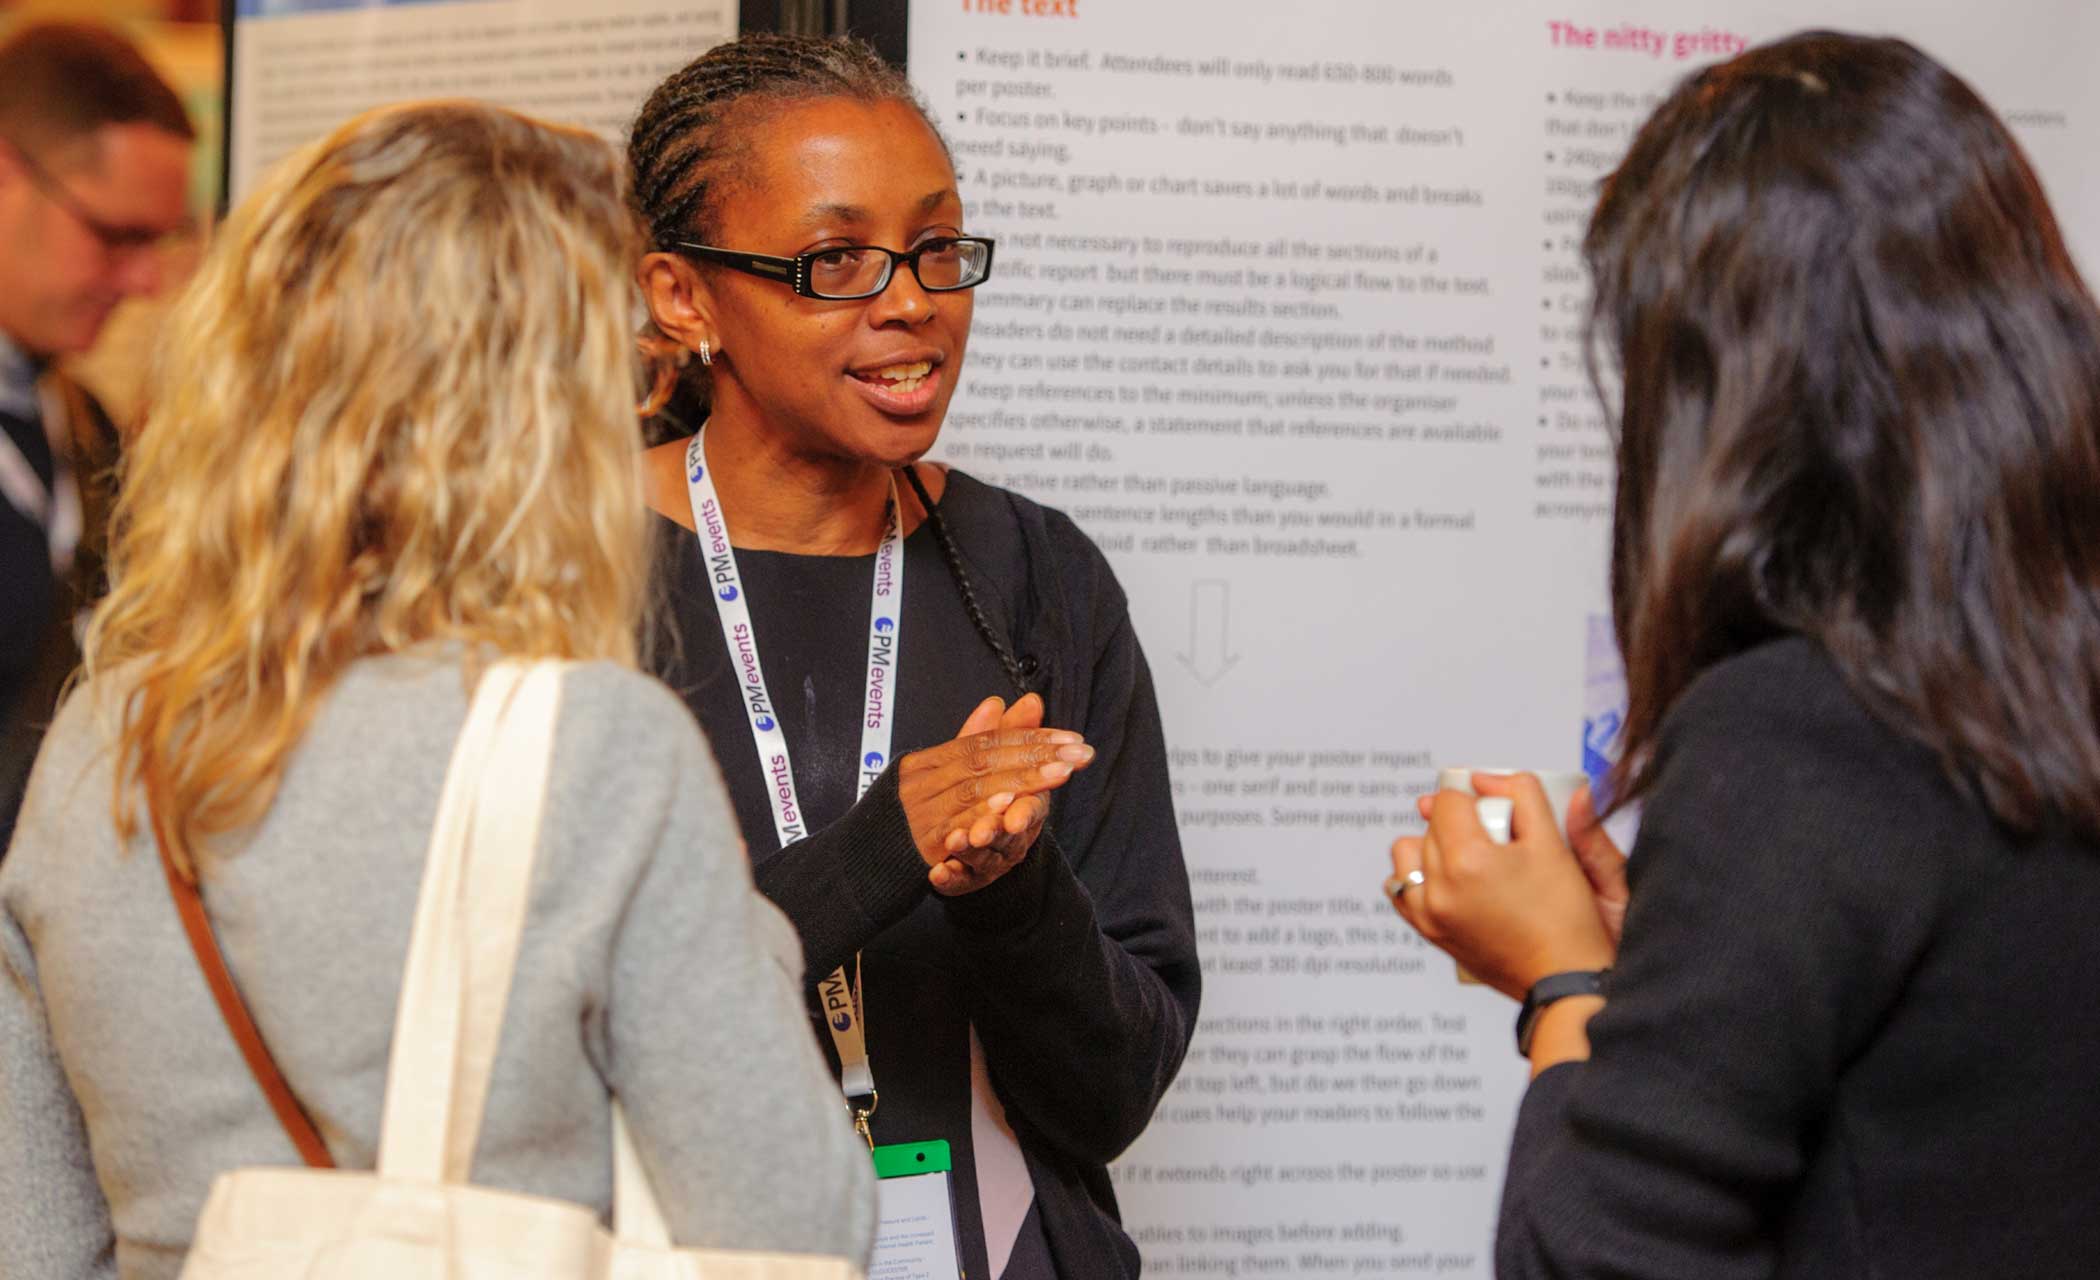 Pharmacy technician presenting a poster at a UKCPA event